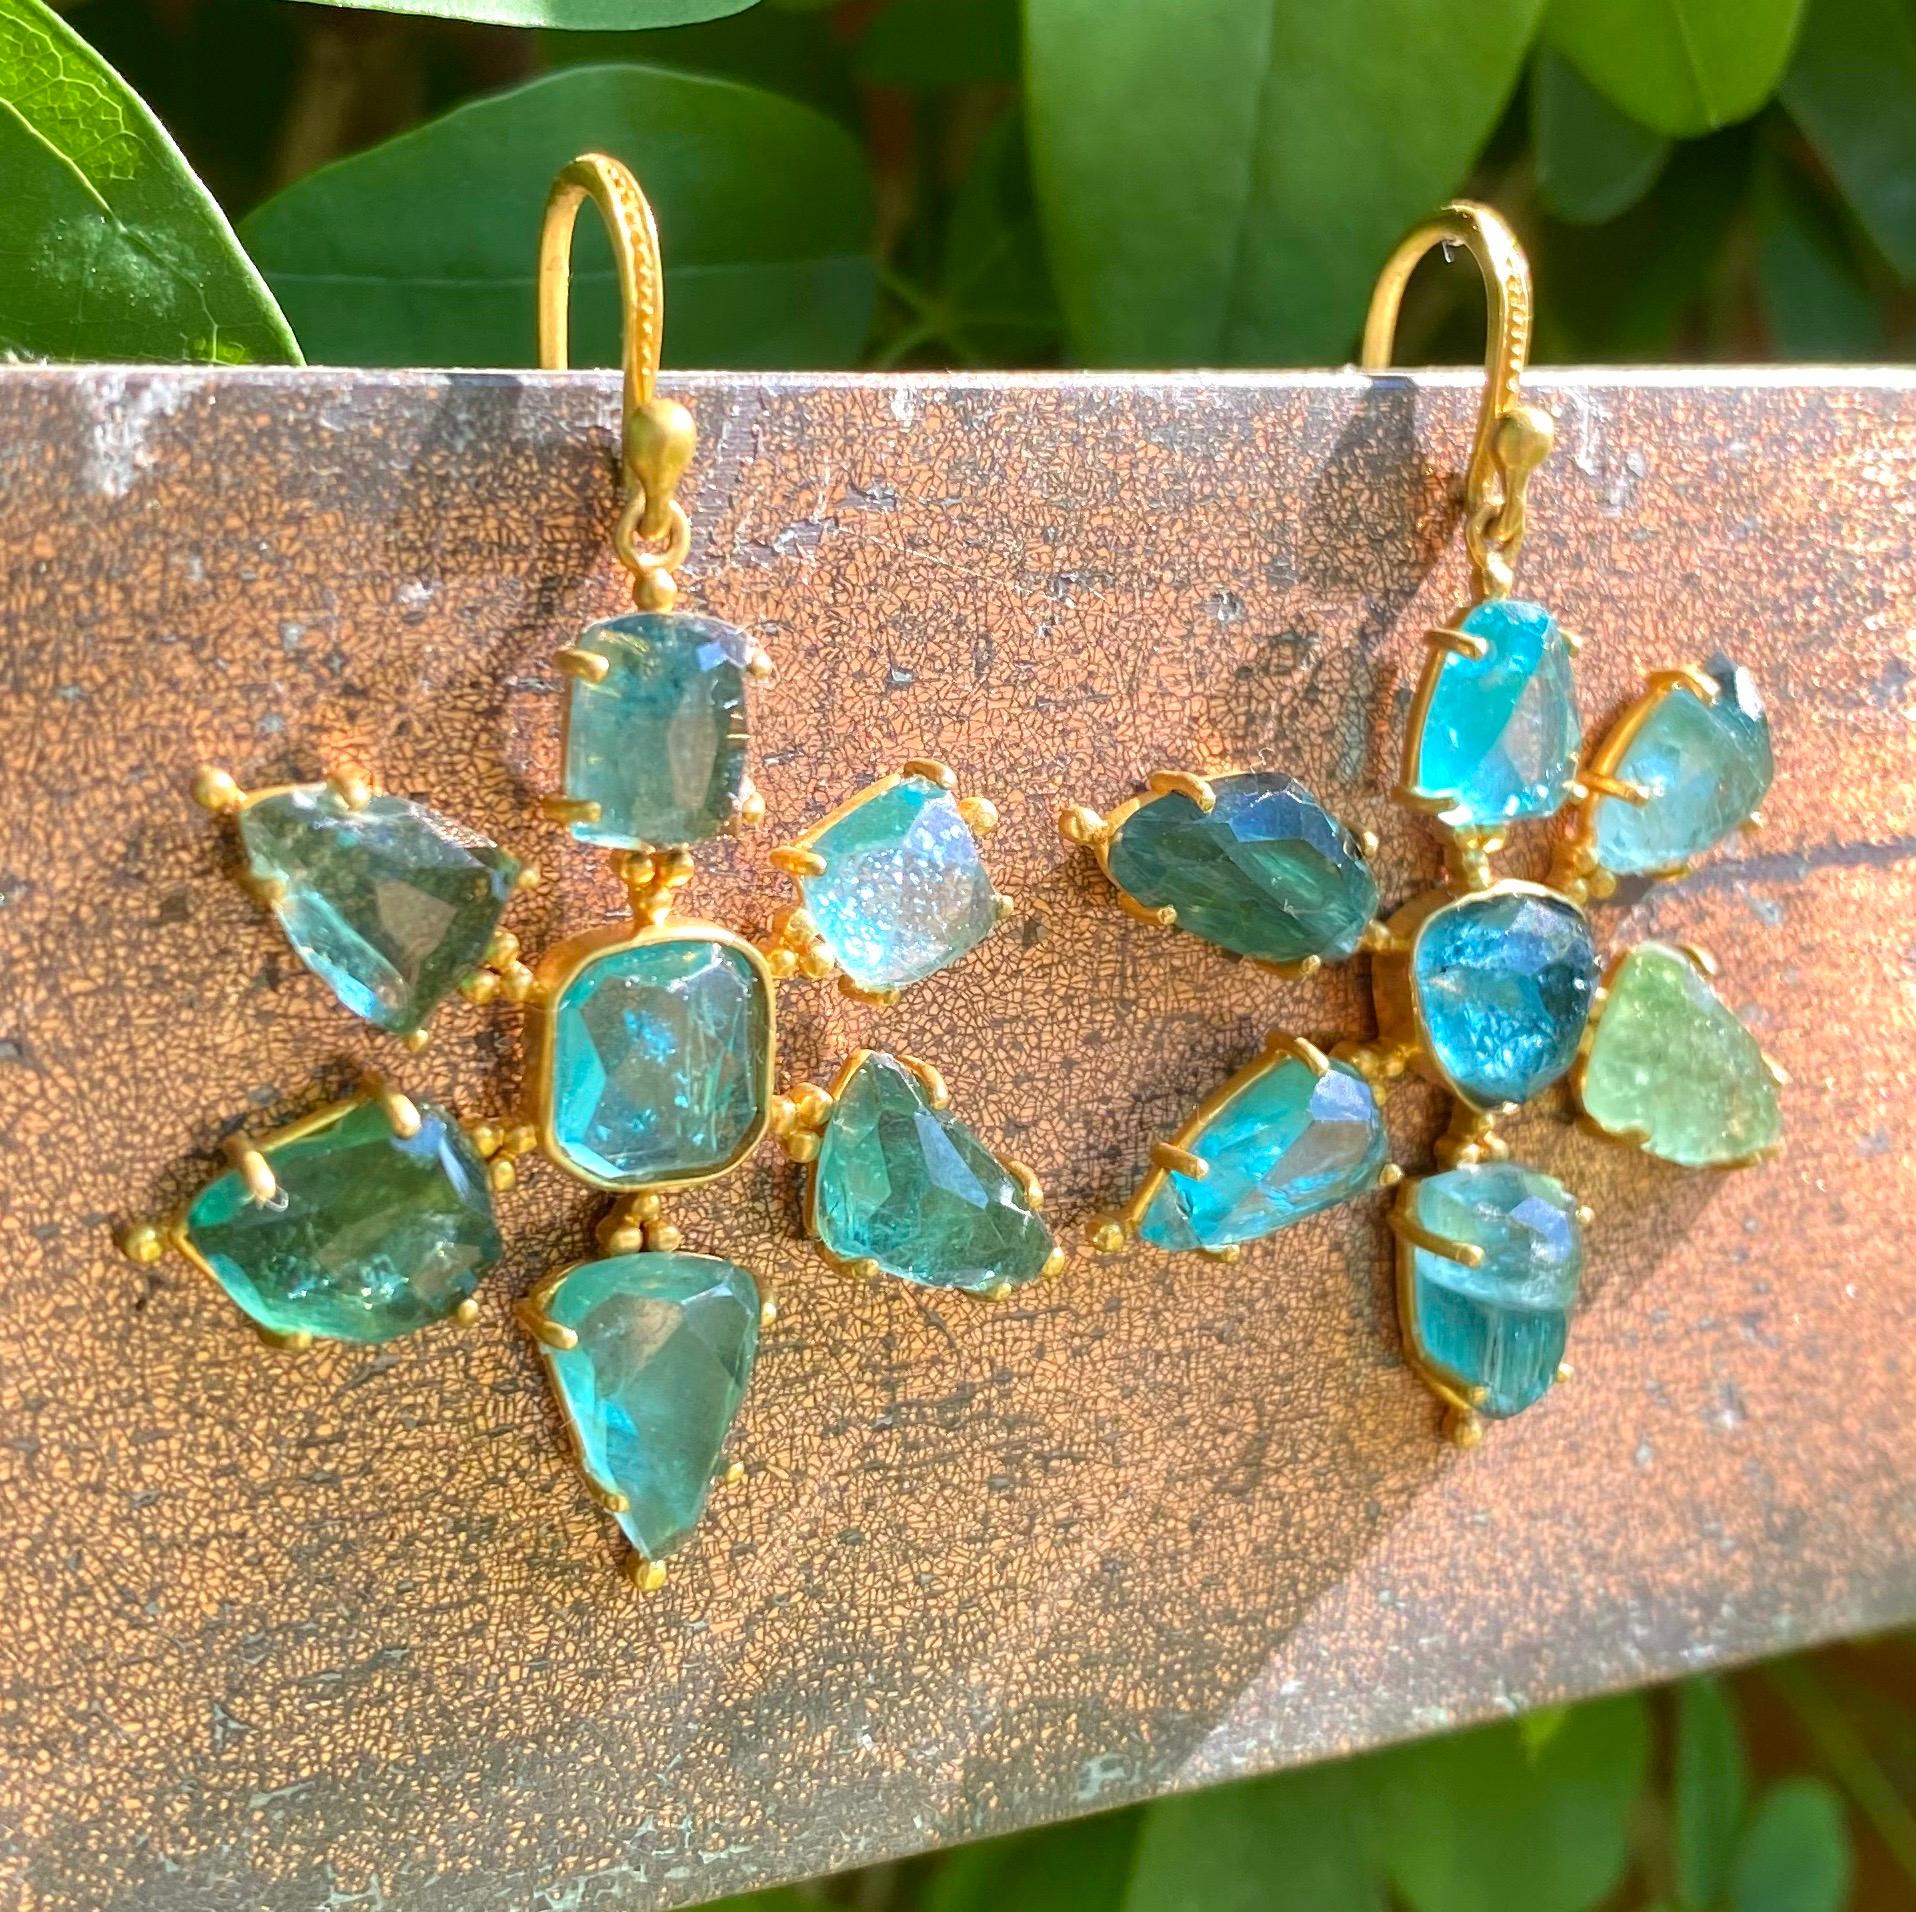 Designed by award winning jewelry designer, Lauren Harper, these Green Tourmaline and Apatite Earrings are set in a beautiful warm 18kt Gold  flower motif. Lovely variety of shades of green color with stones full of natural beauty. Lightweight